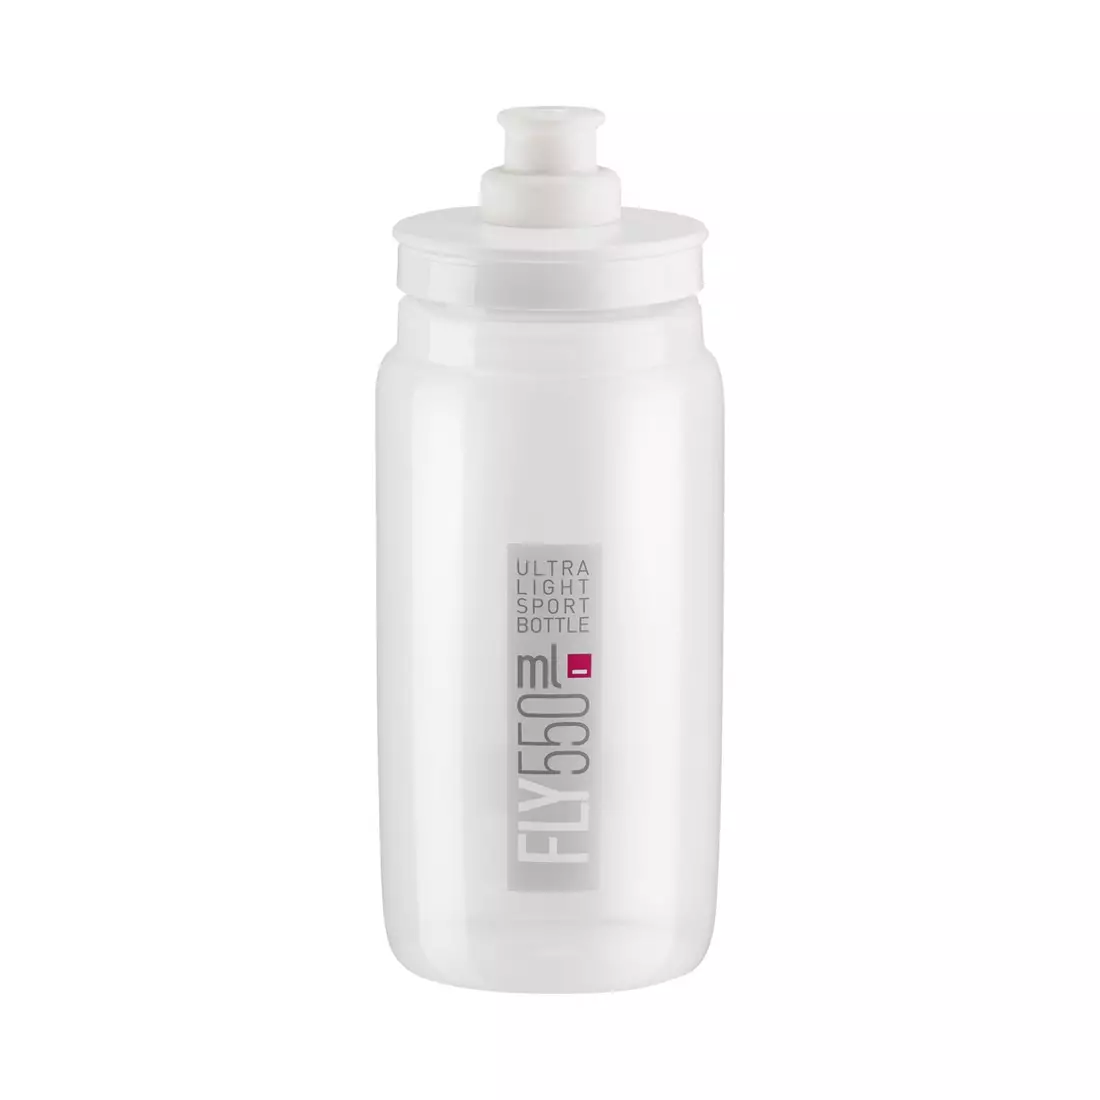 https://www.mikesport.eu/img/imagecache/58001-59000/product-media/ELITE-FLY-TEX-bicycle-water-bottle-550-ml-clear-120158-1100x1100.webp